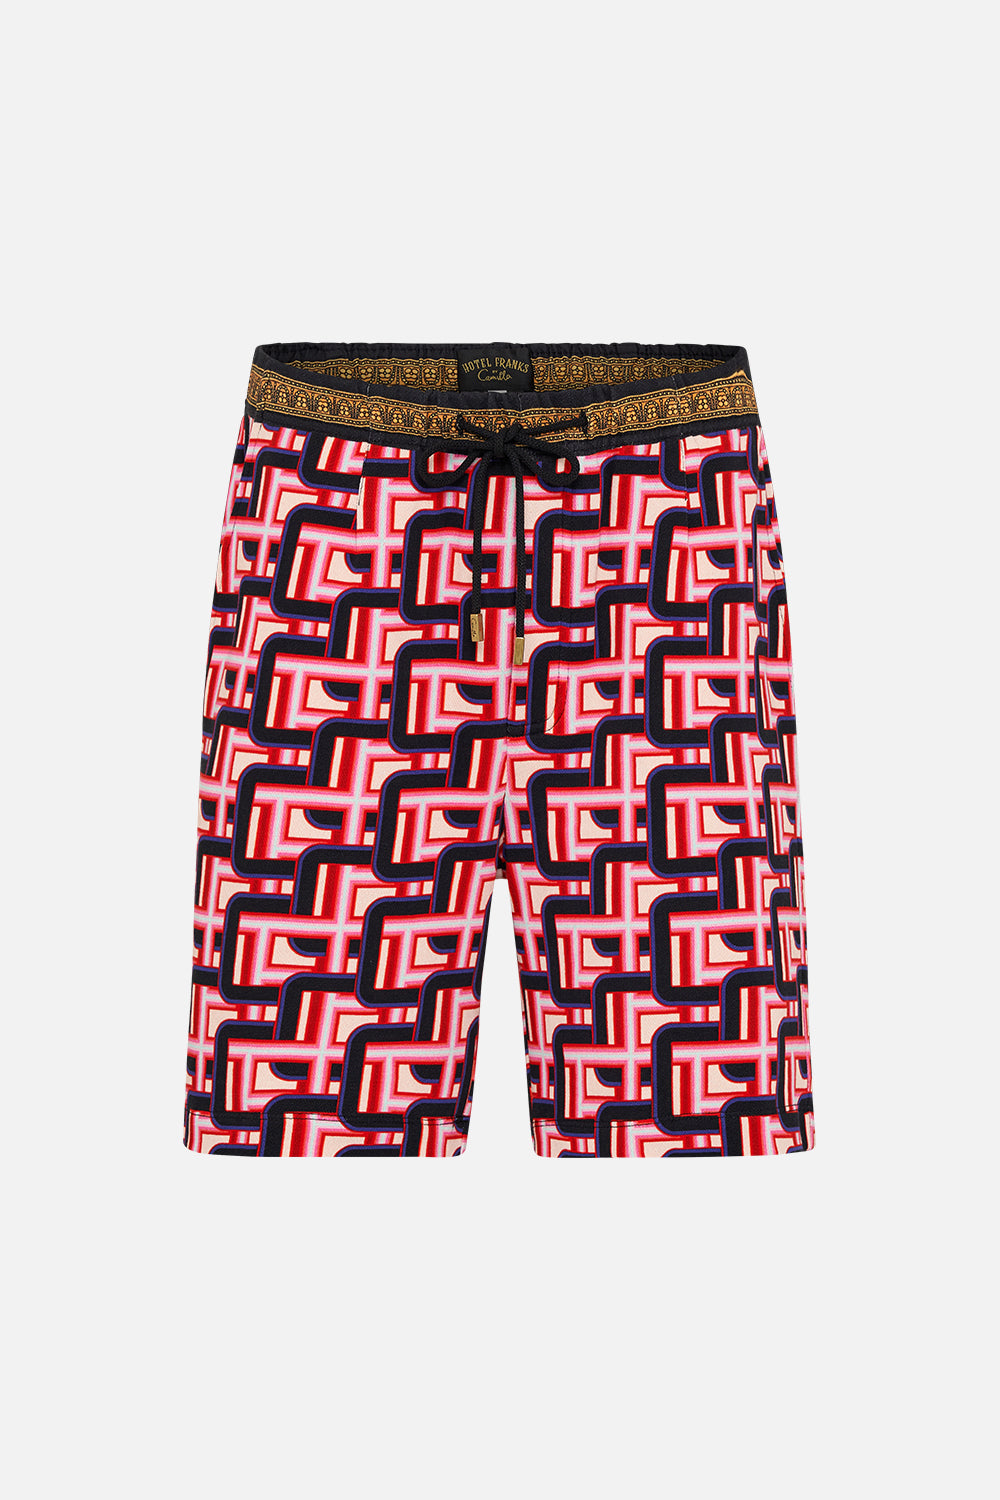 Product view HOTEL FRANKS BY CAMILLA mens track short in Rome Retro print 